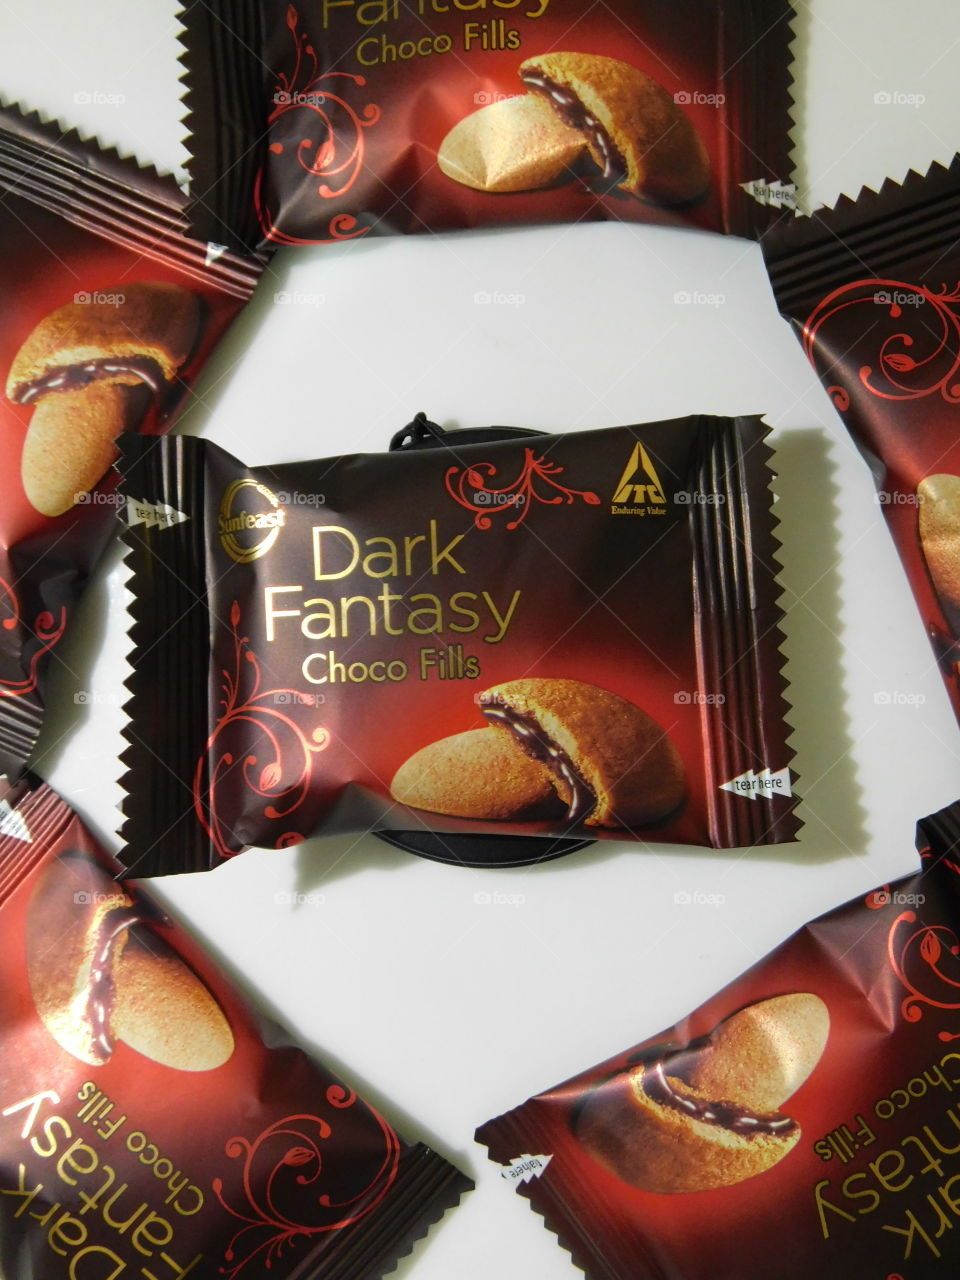 product photography - It is dark fantasy choco fills biscuits by Sunfeast .It is chocolate filled sweet biscuits with delicious taste